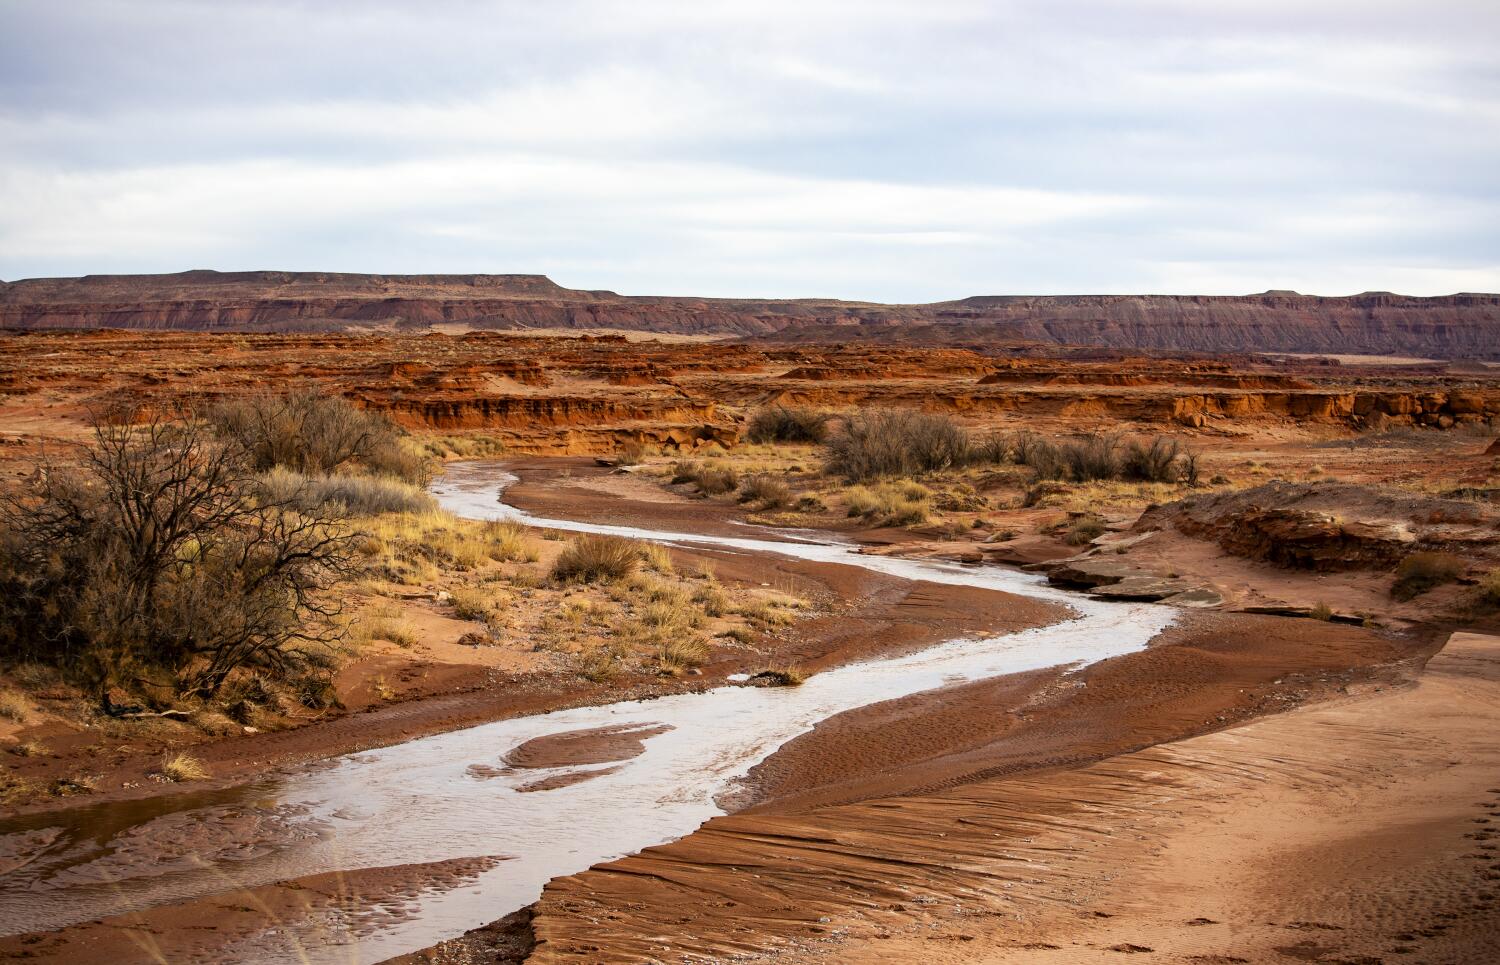 Indigenous nations approve historic water rights agreement with Arizona. It now goes to Congress